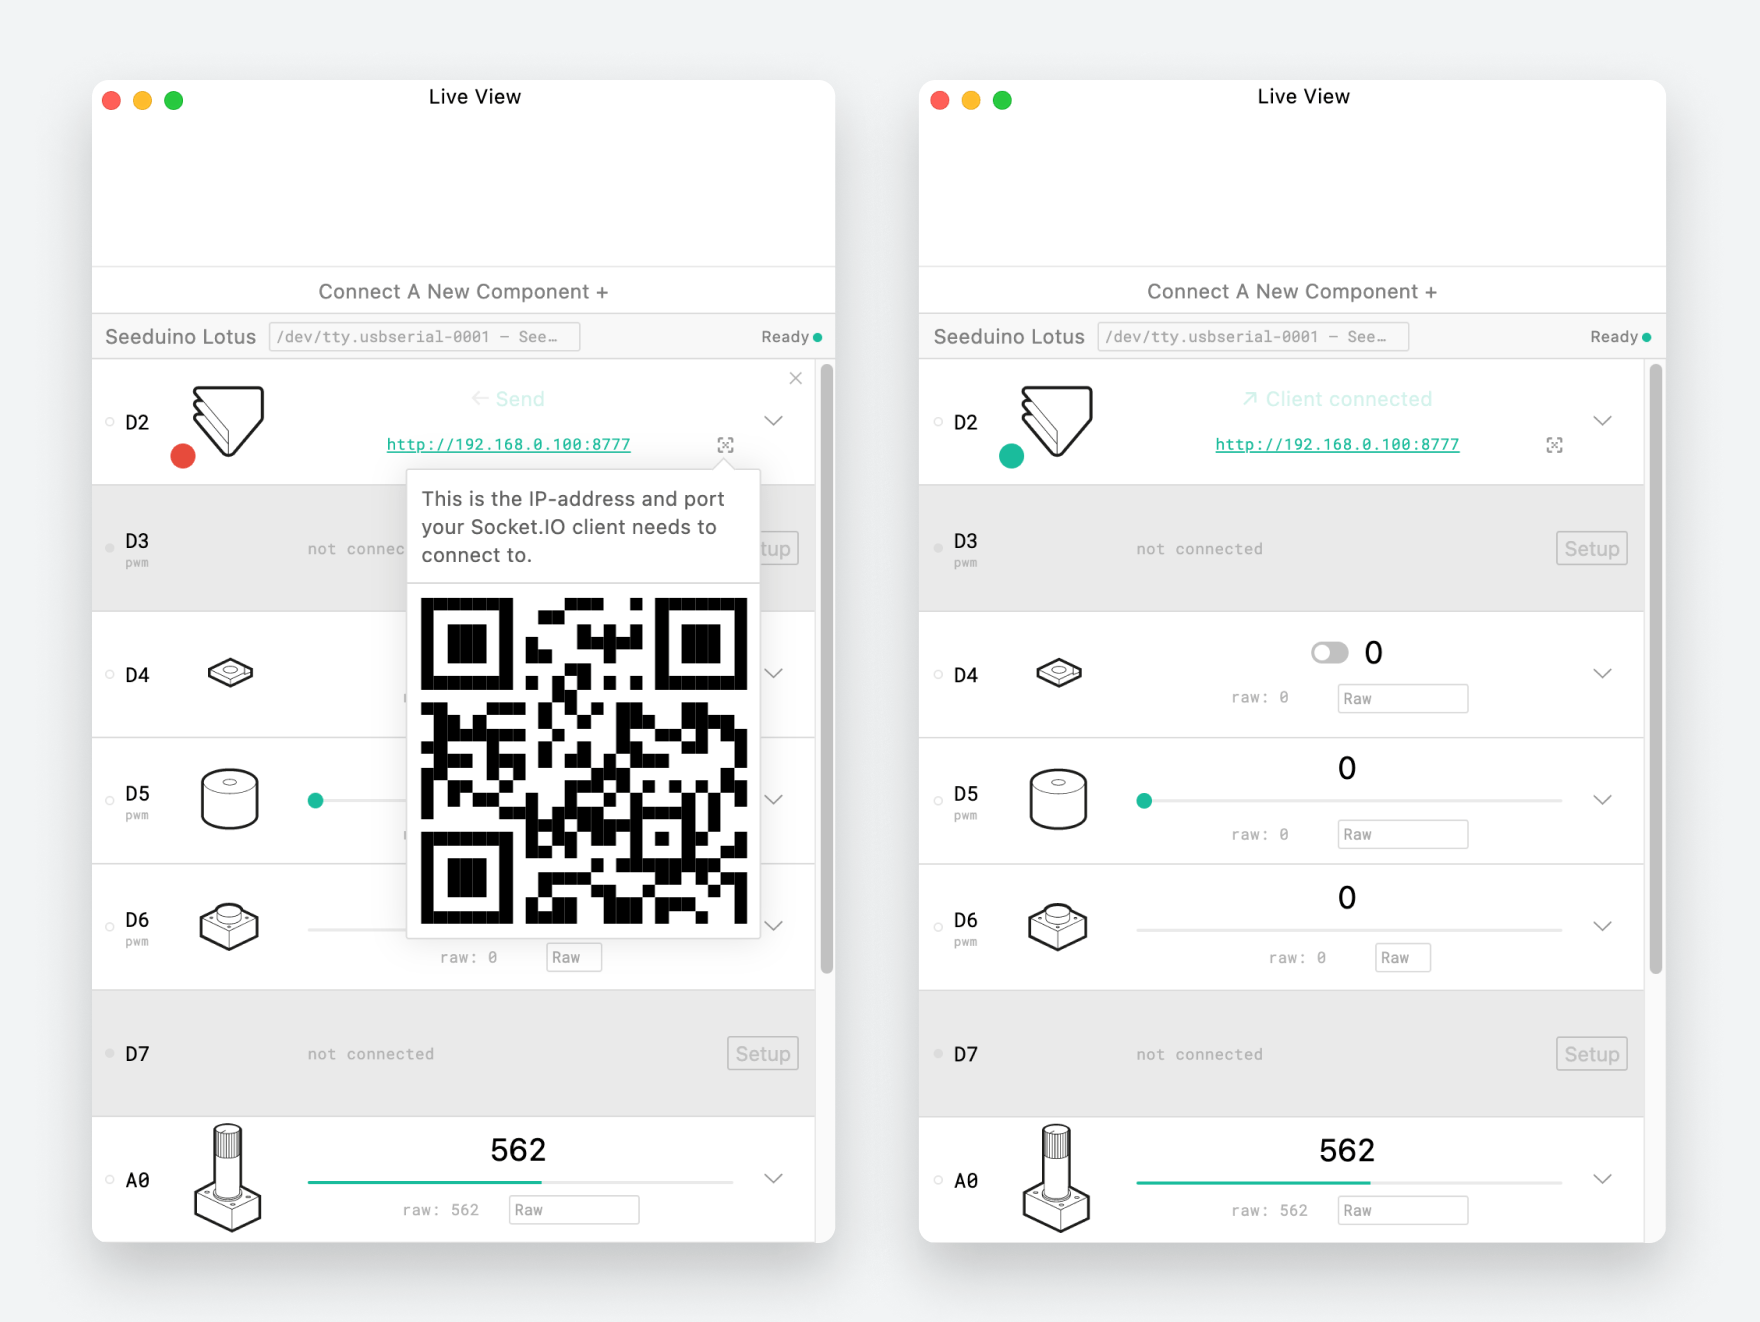 Scan the QR code to connect ProtoPie Player